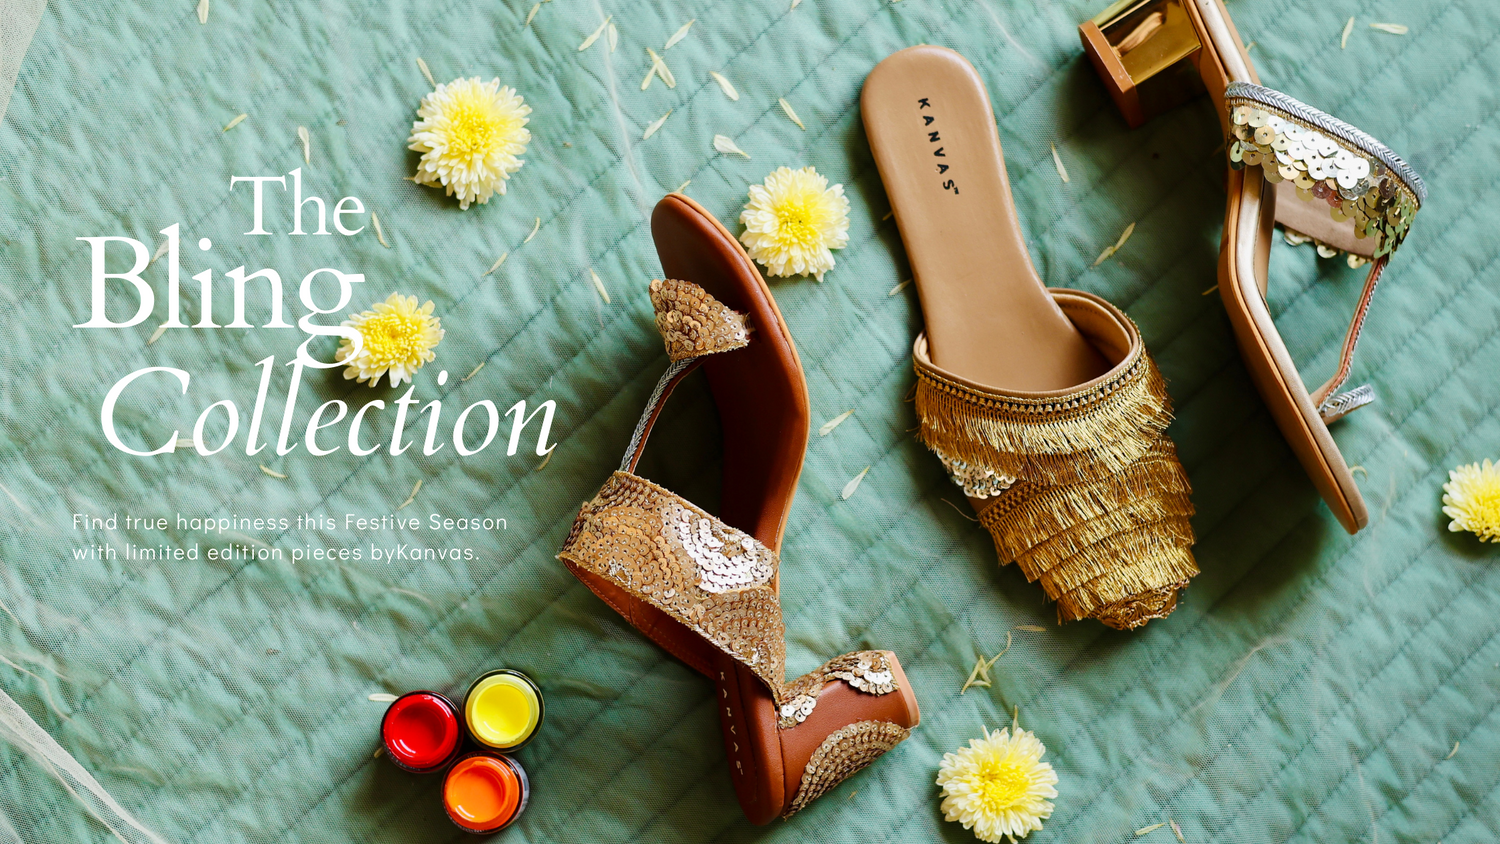 All Shoes - Women Luxury Collection